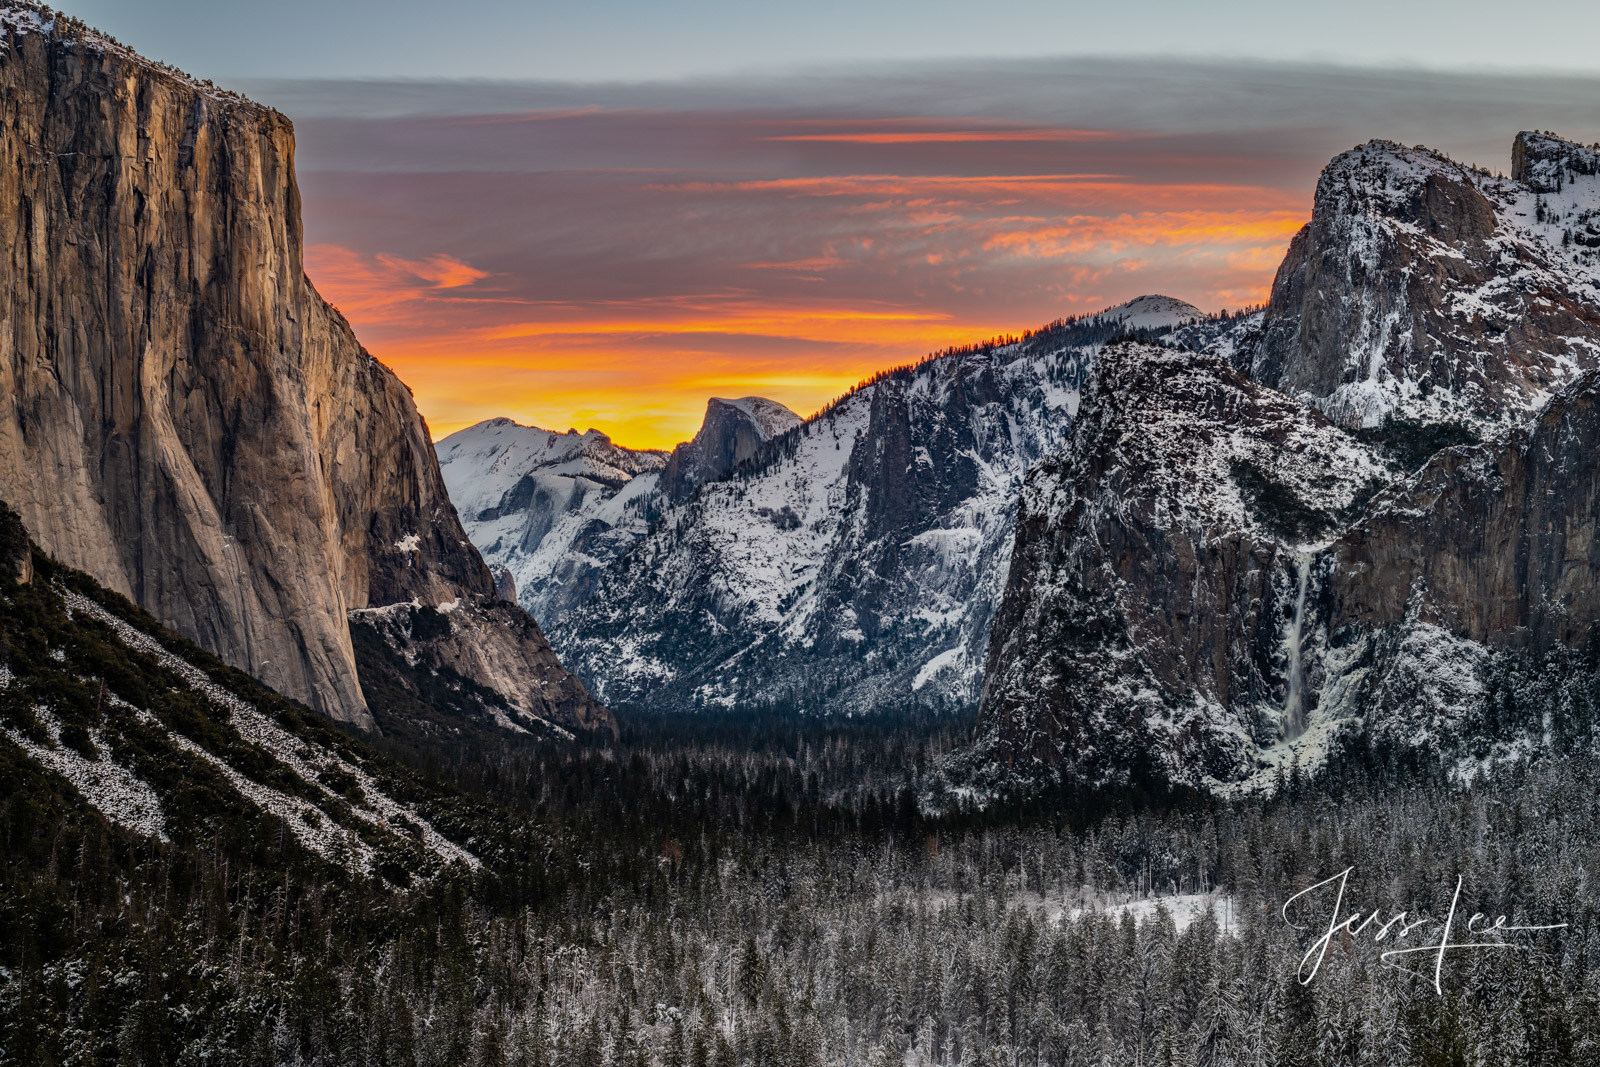 1 of 200 California Landscape Prints of Morning Grace over Yosemite valley. This is part of the luxurious collection of fine...